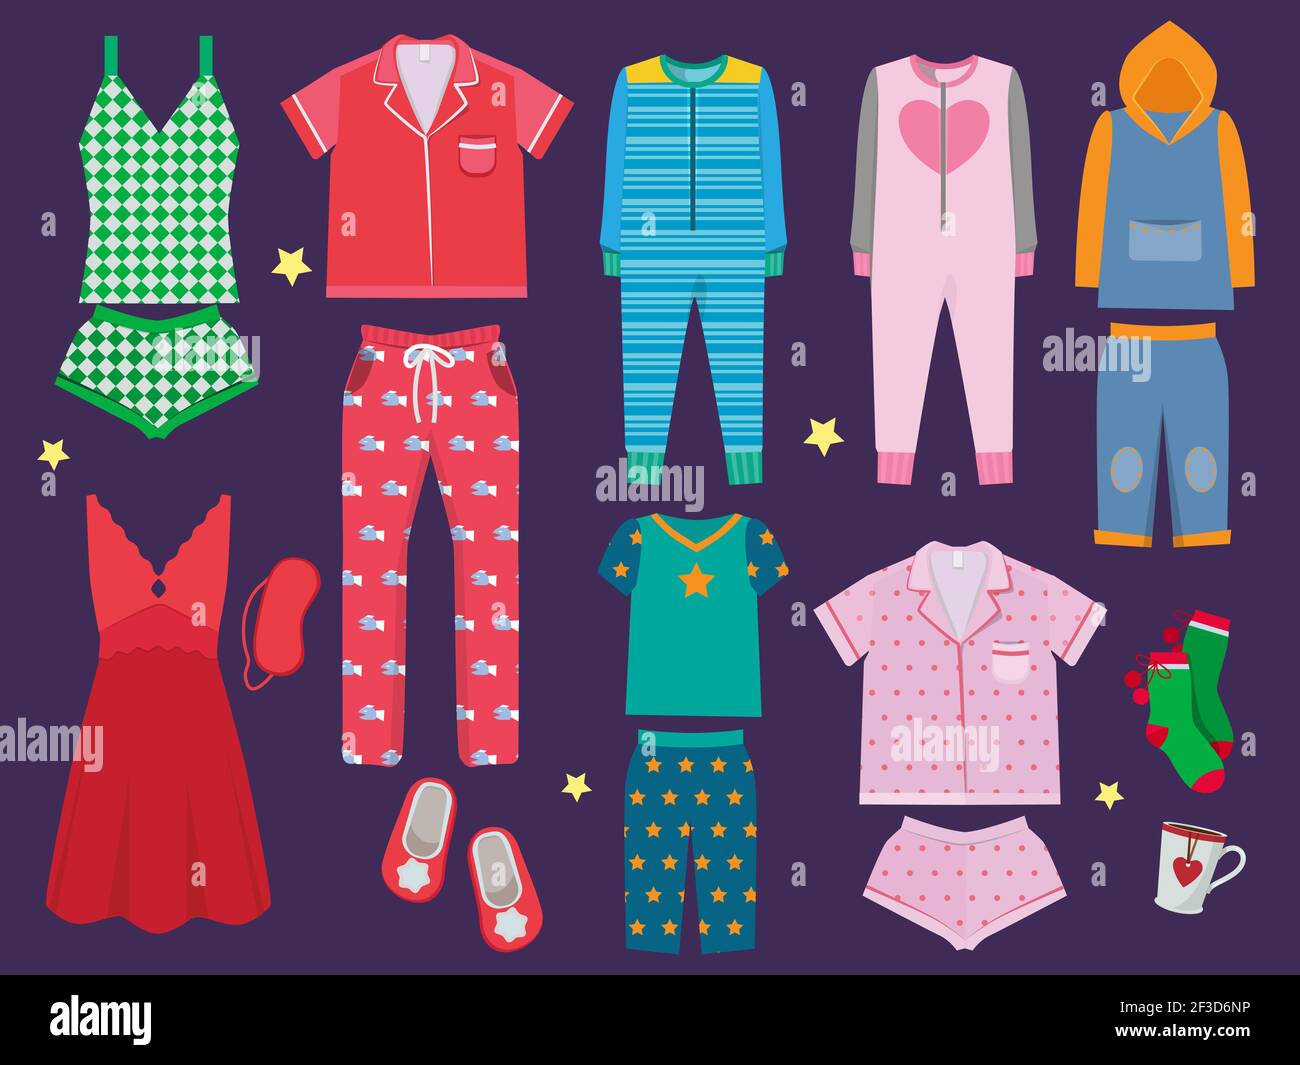 Pajamas set. Sleeping clothes collection for children and adults